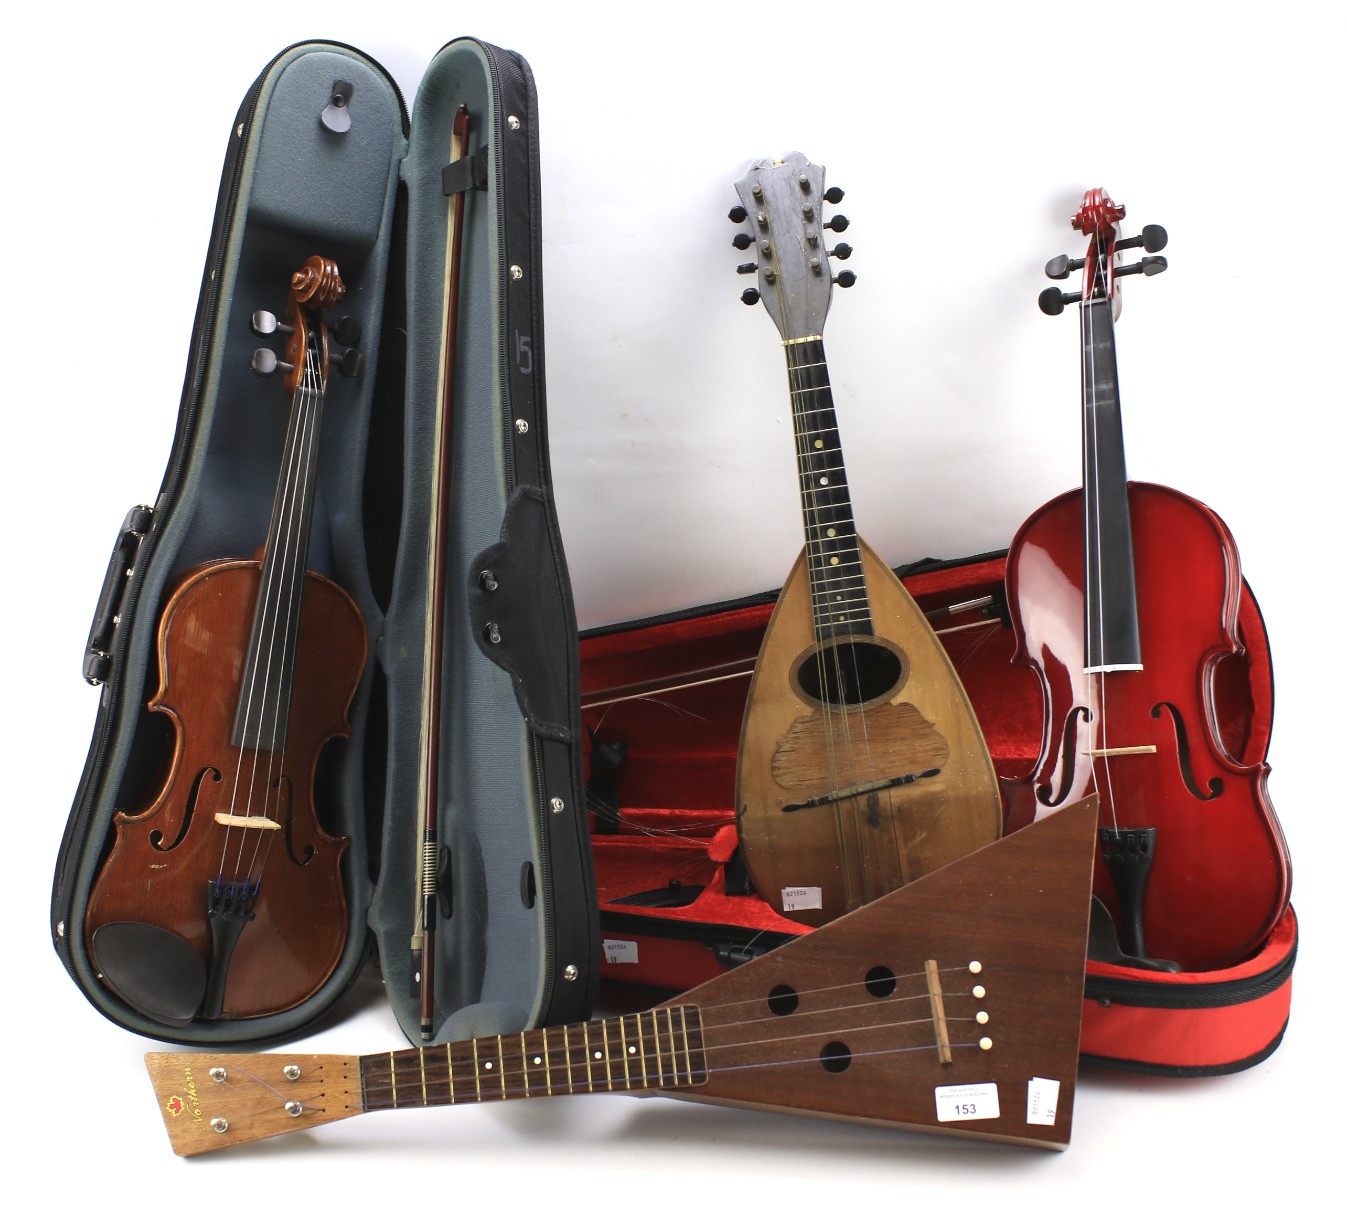 Two violins and two other stringed instruments.